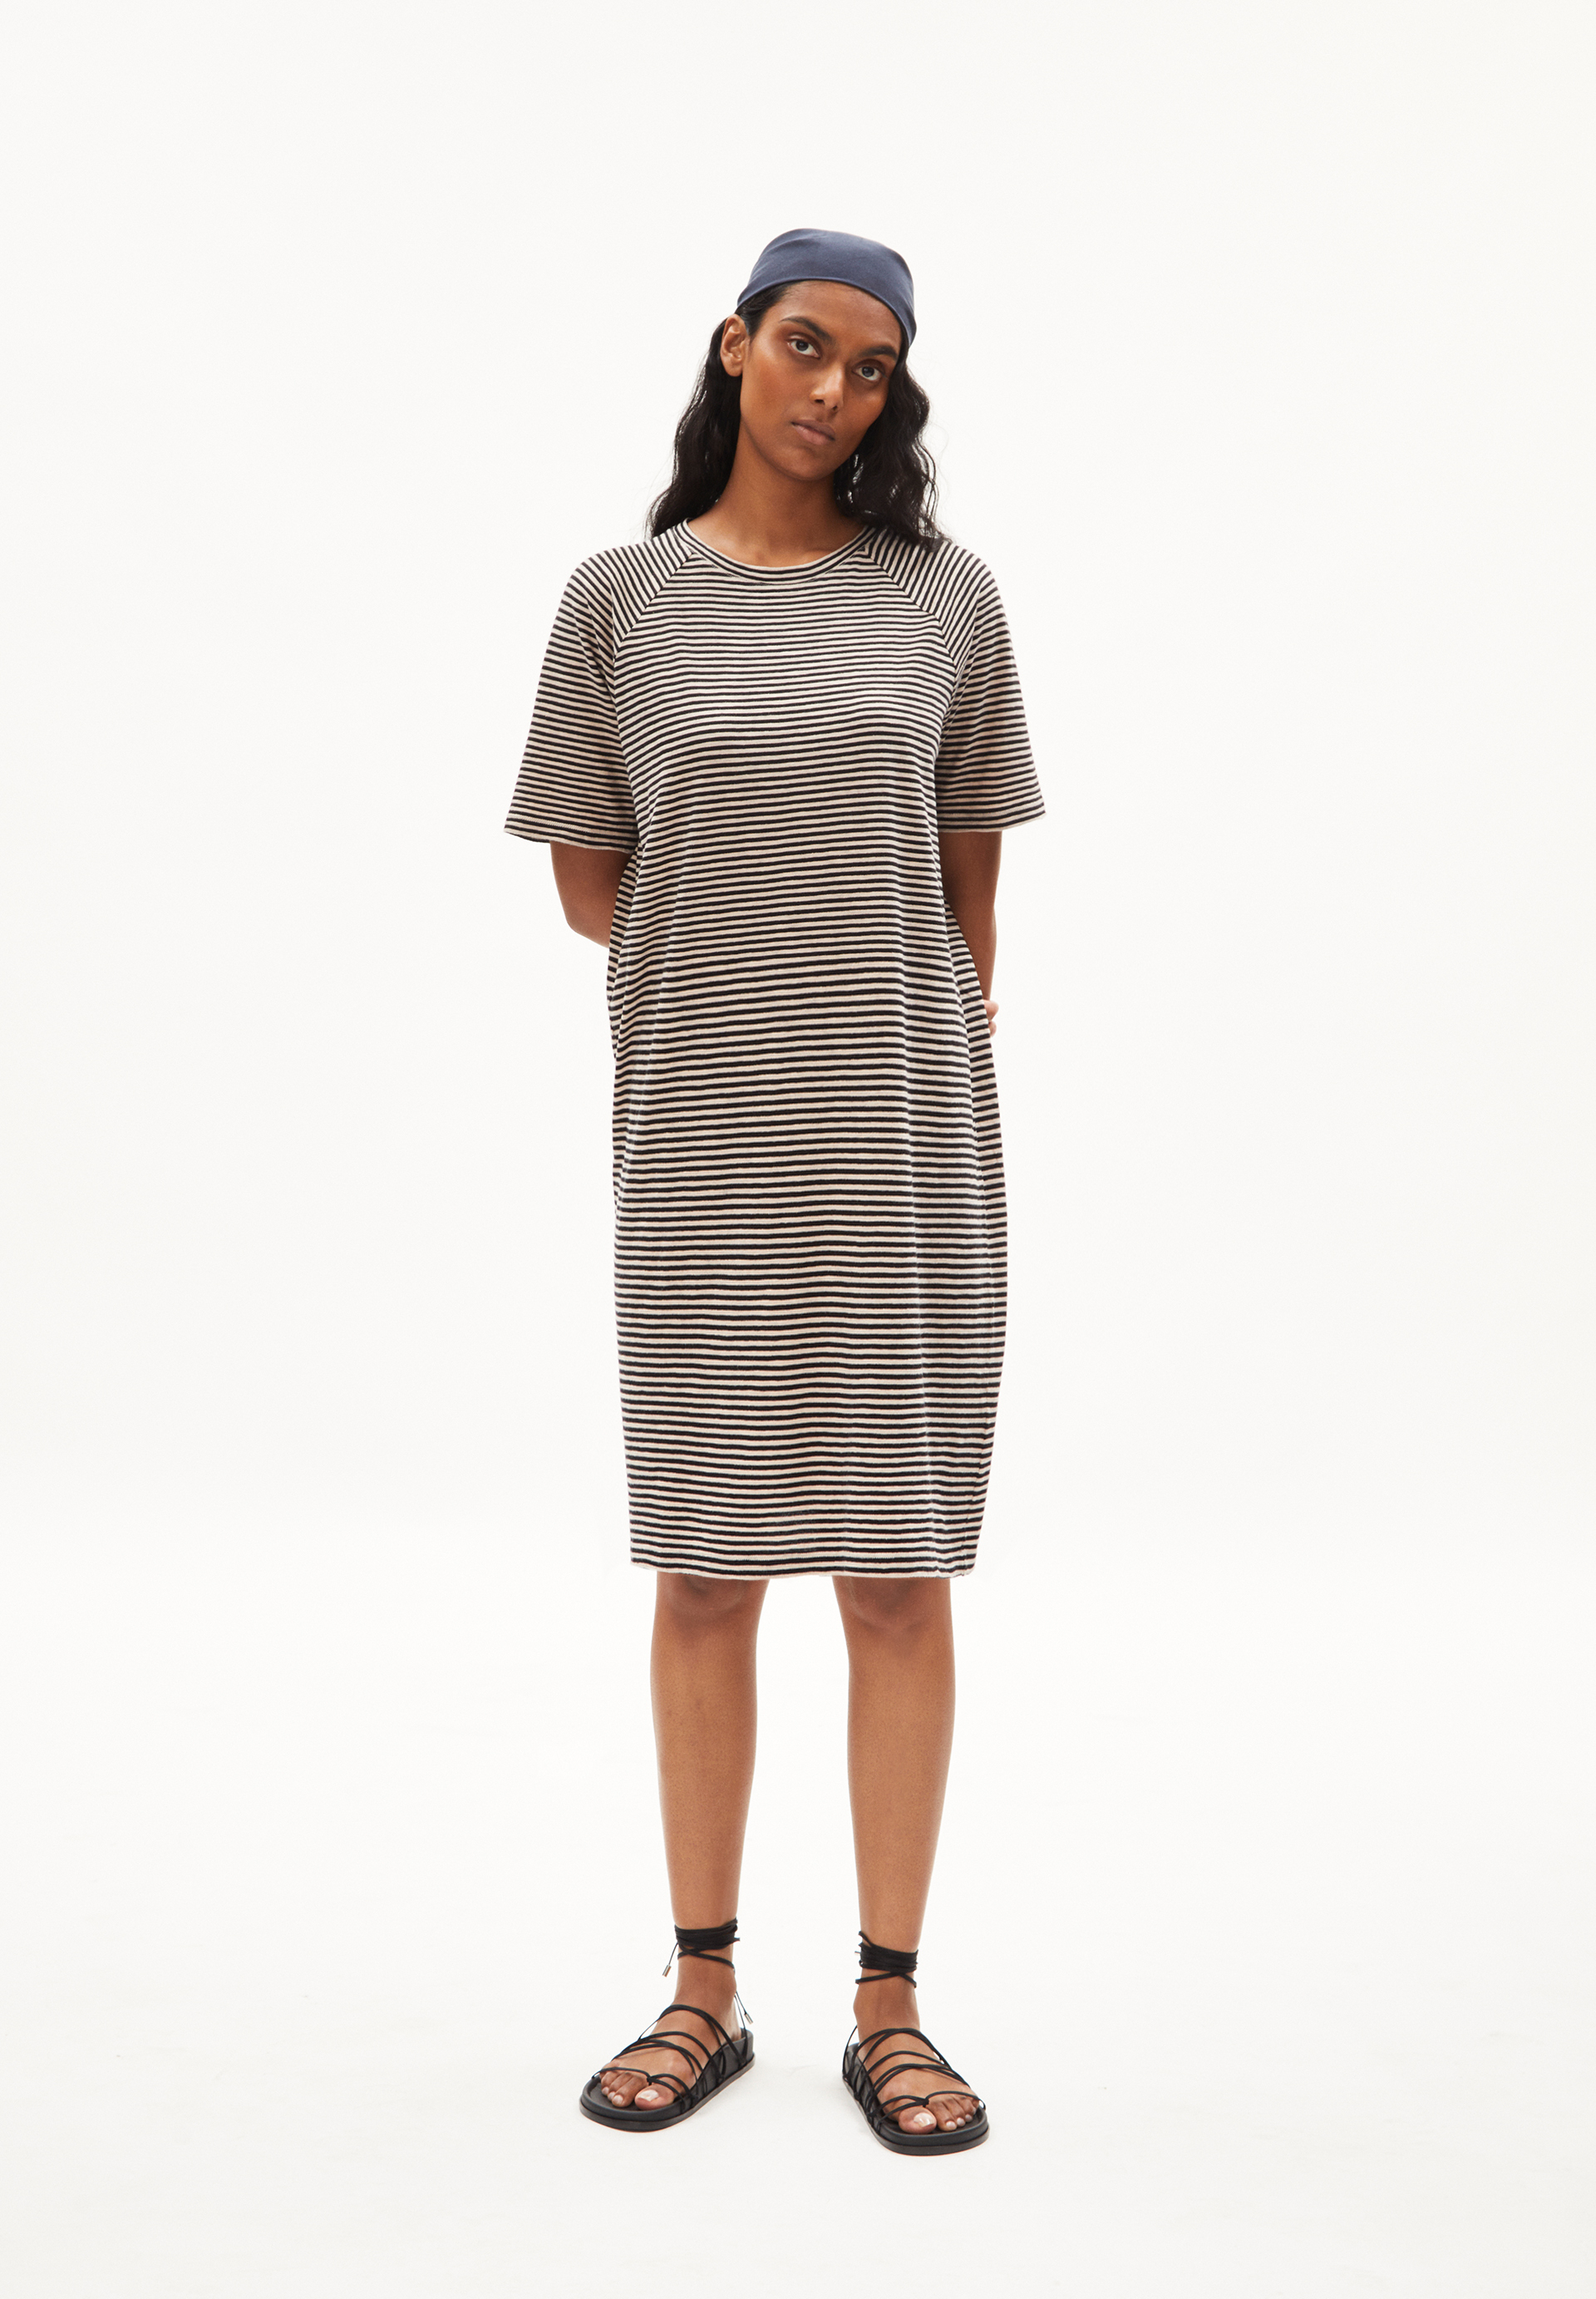 CHAARU LOVELY STRIPES Jersey Dress made of Organic Cotton